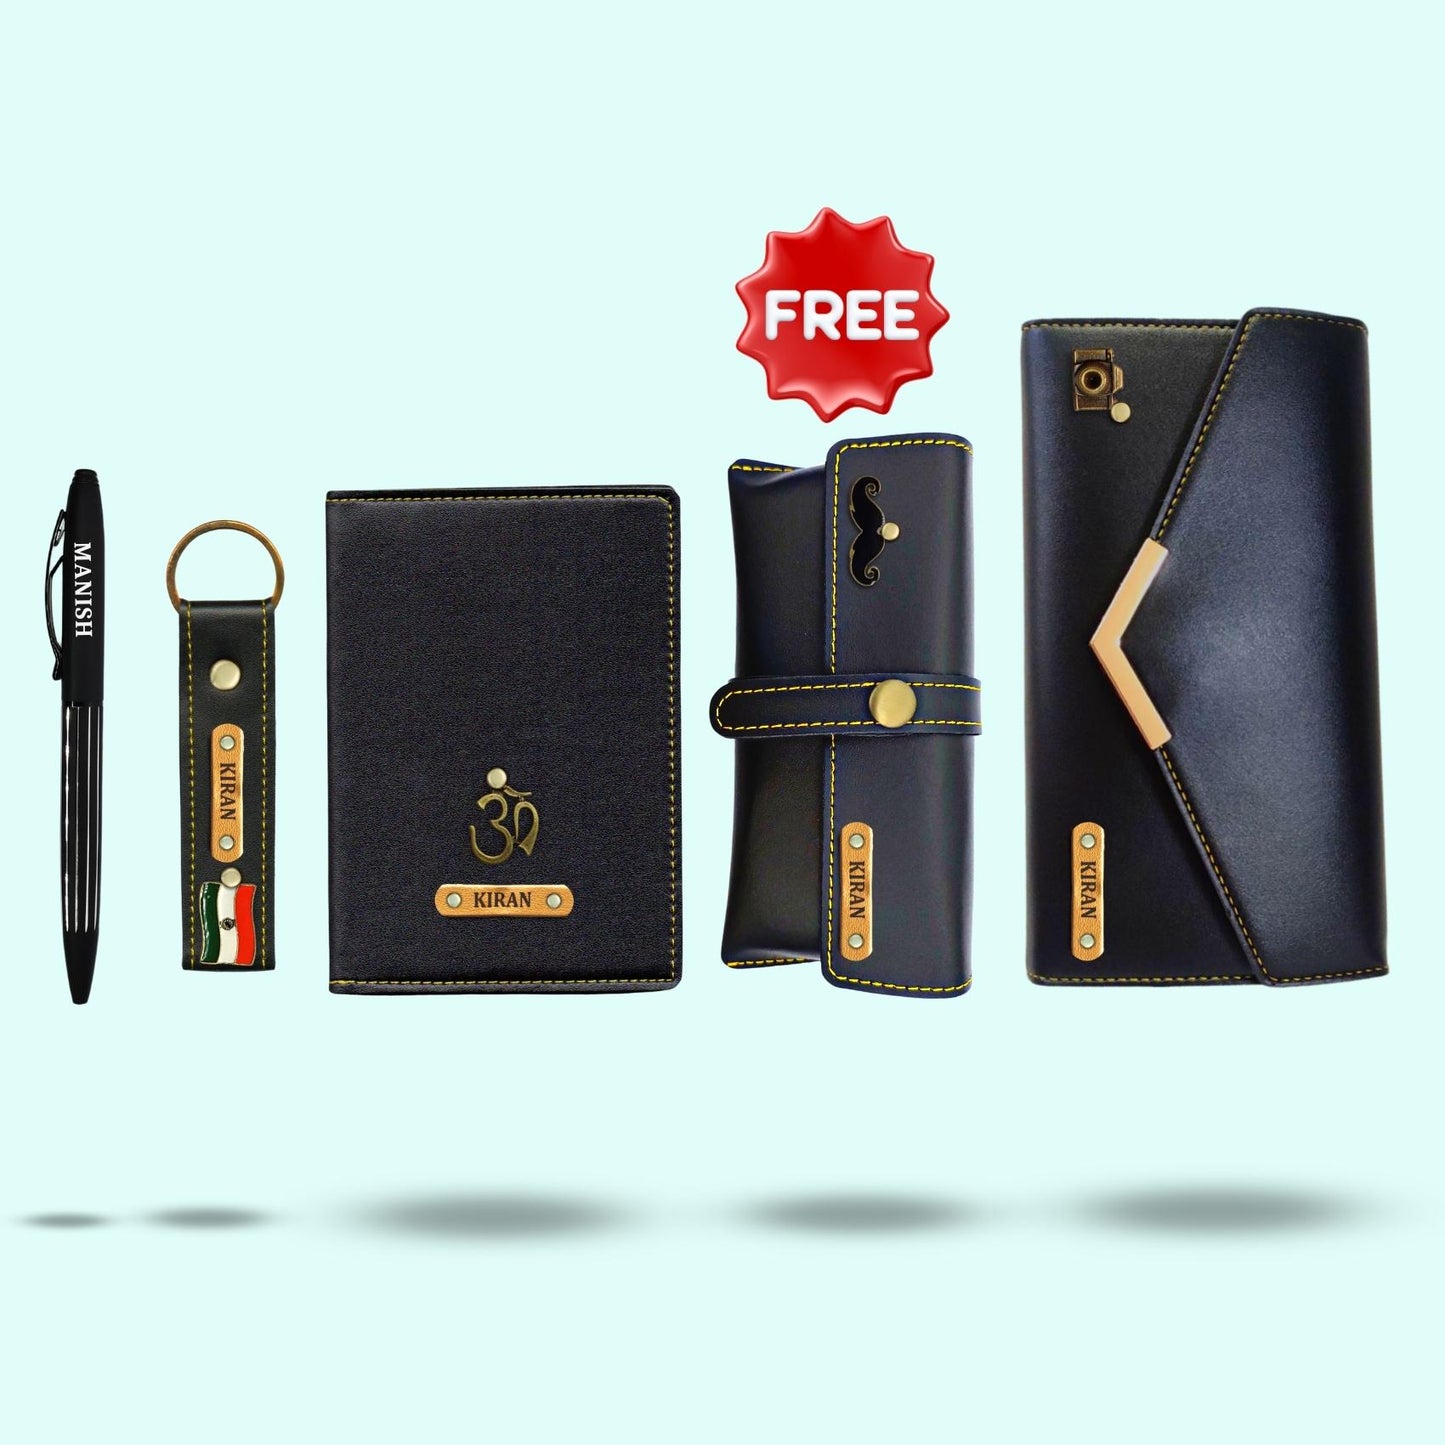 5-in-1 Personalized Special Combo for Women - Includes 1 Free Sunglass Case